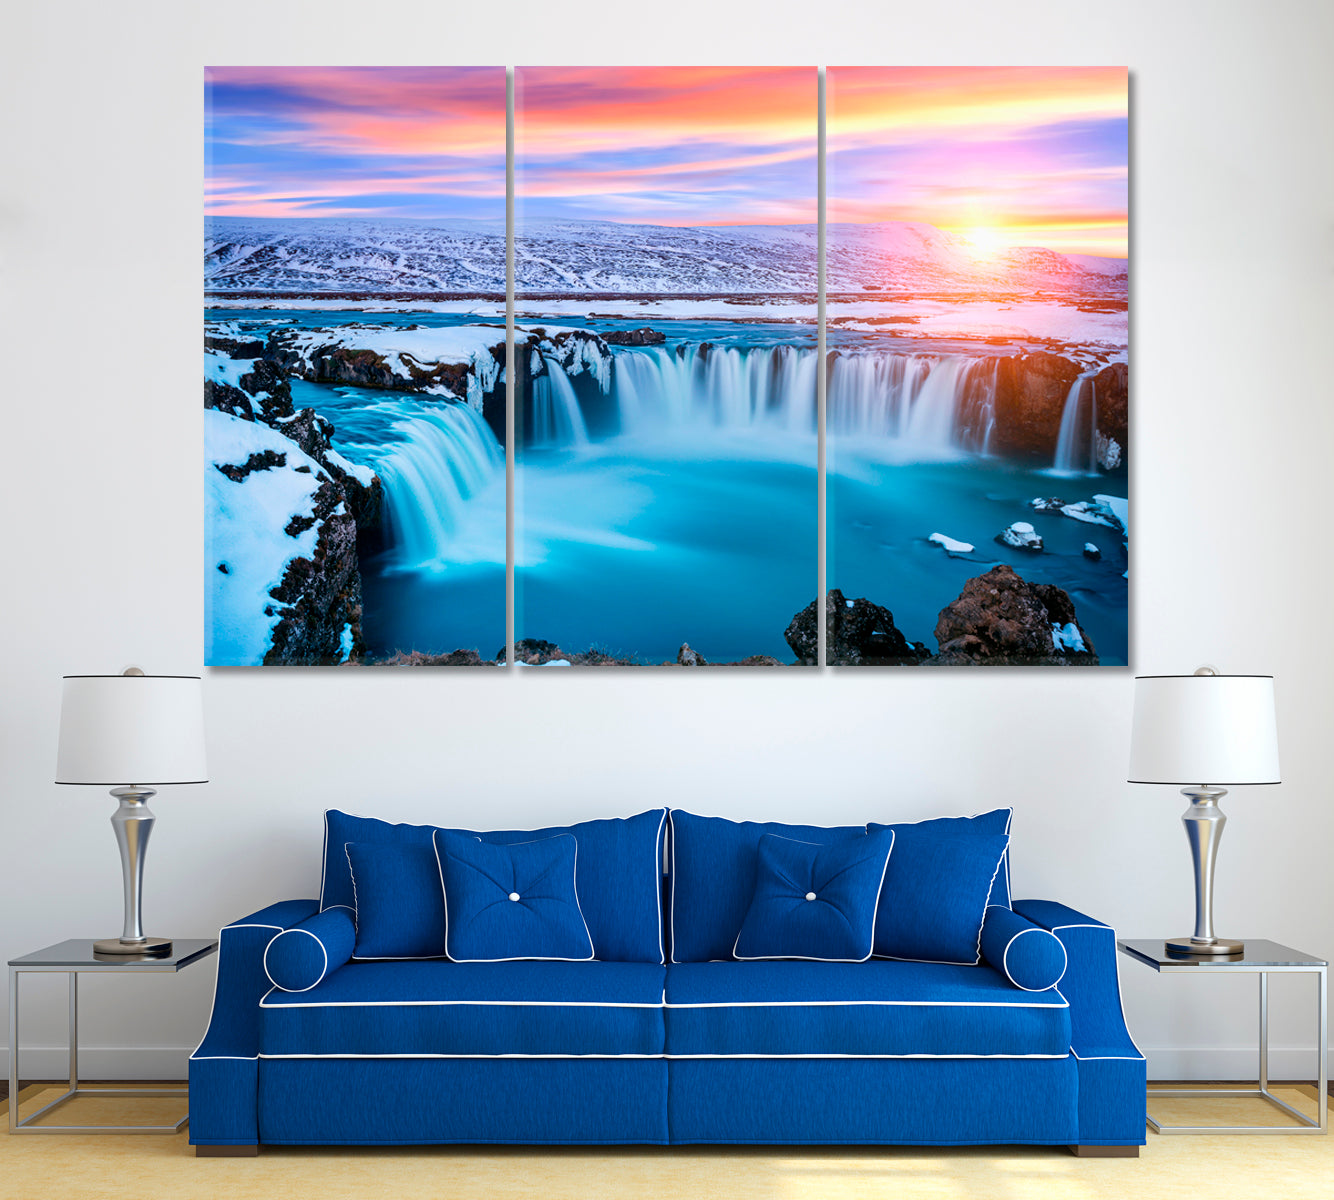 Godafoss Waterfall Iceland Canvas Print ArtLexy 3 Panels 36"x24" inches 